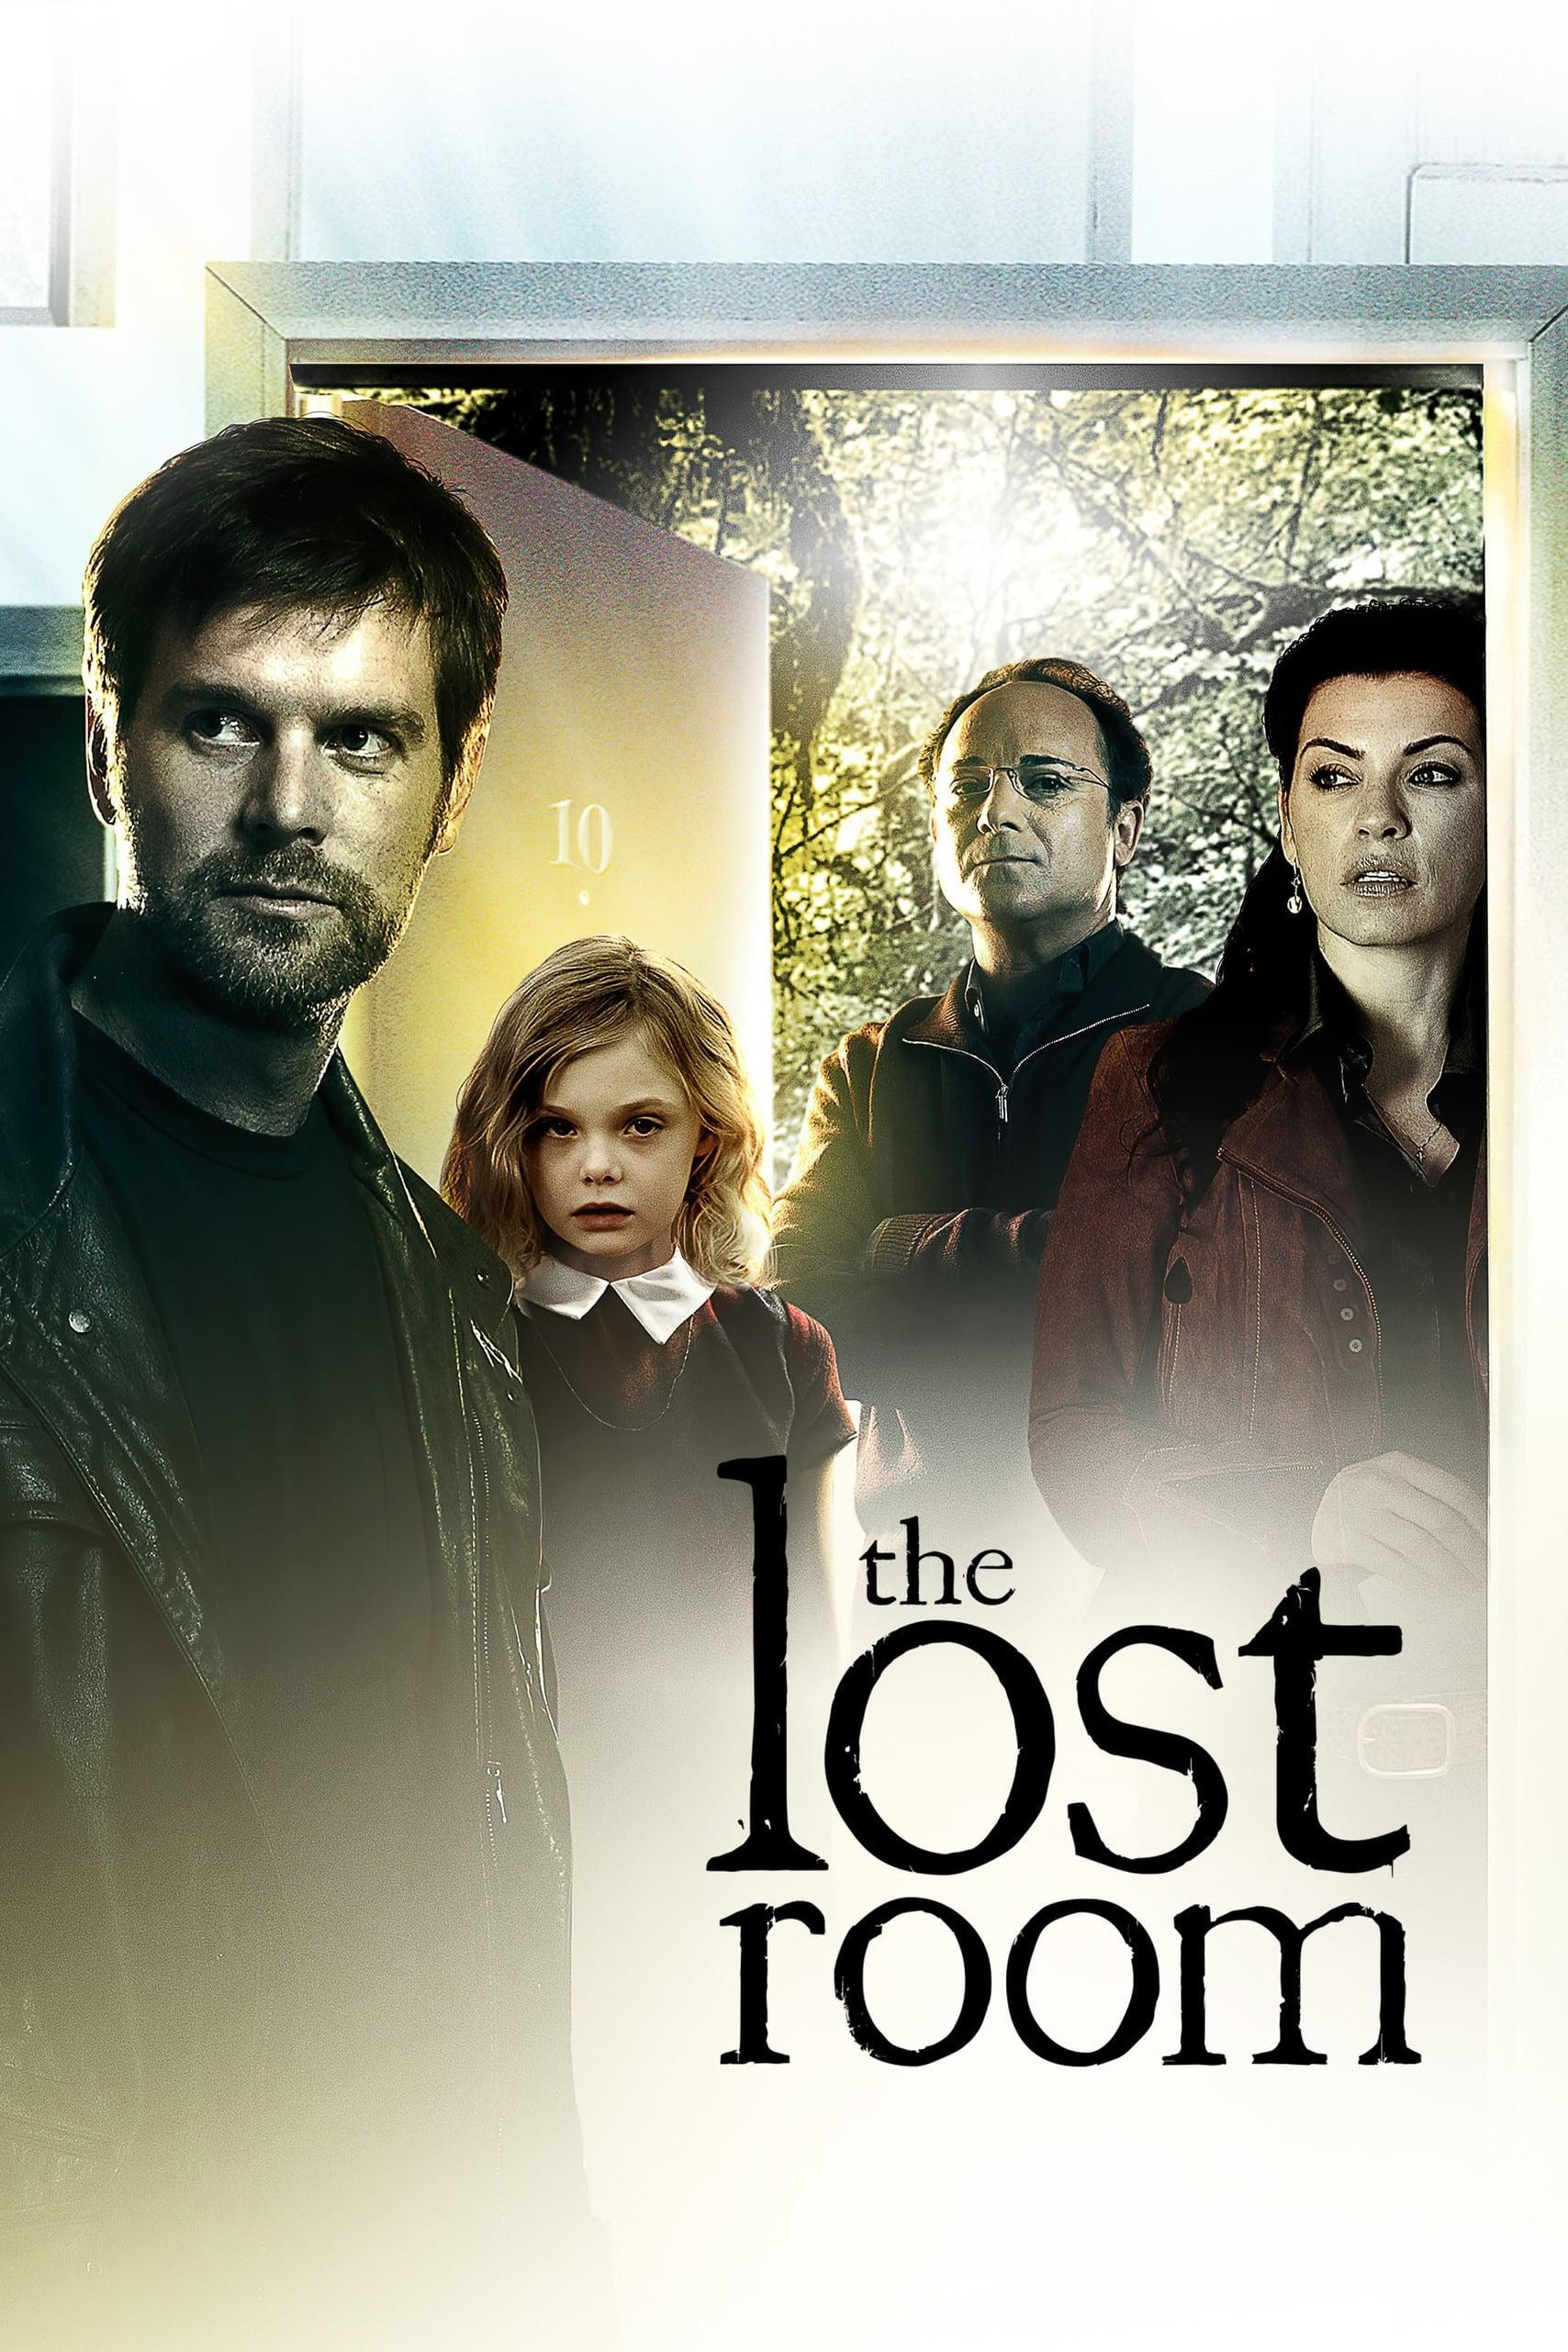 The Lost Room poster